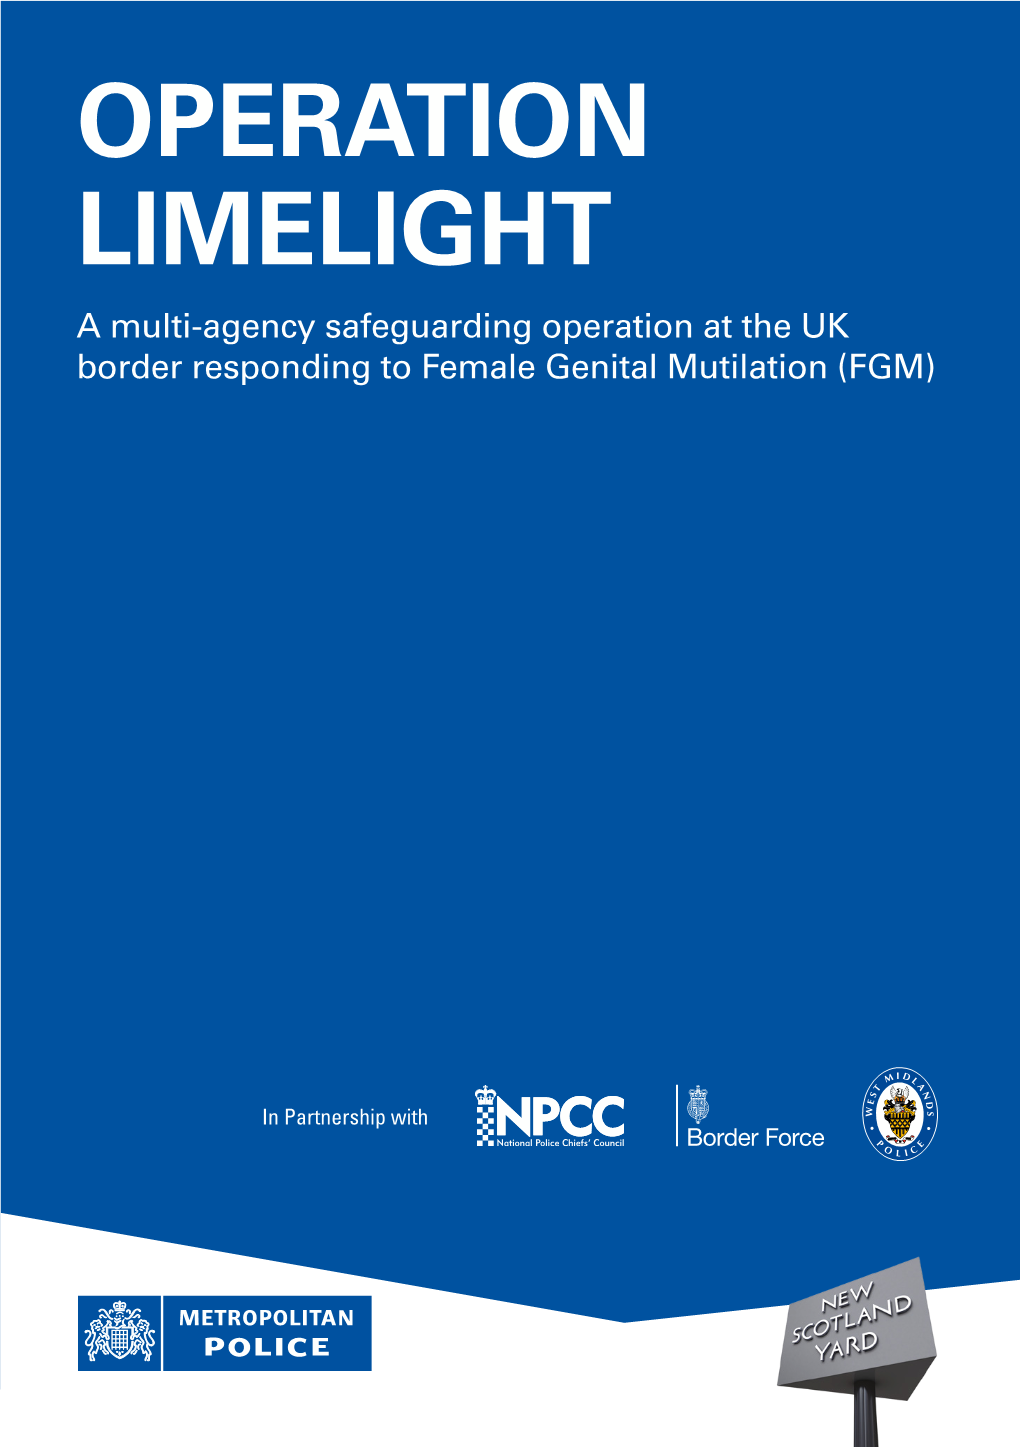 OPERATION LIMELIGHT a Multi-Agency Safeguarding Operation at the UK Border Responding to Female Genital Mutilation (FGM)